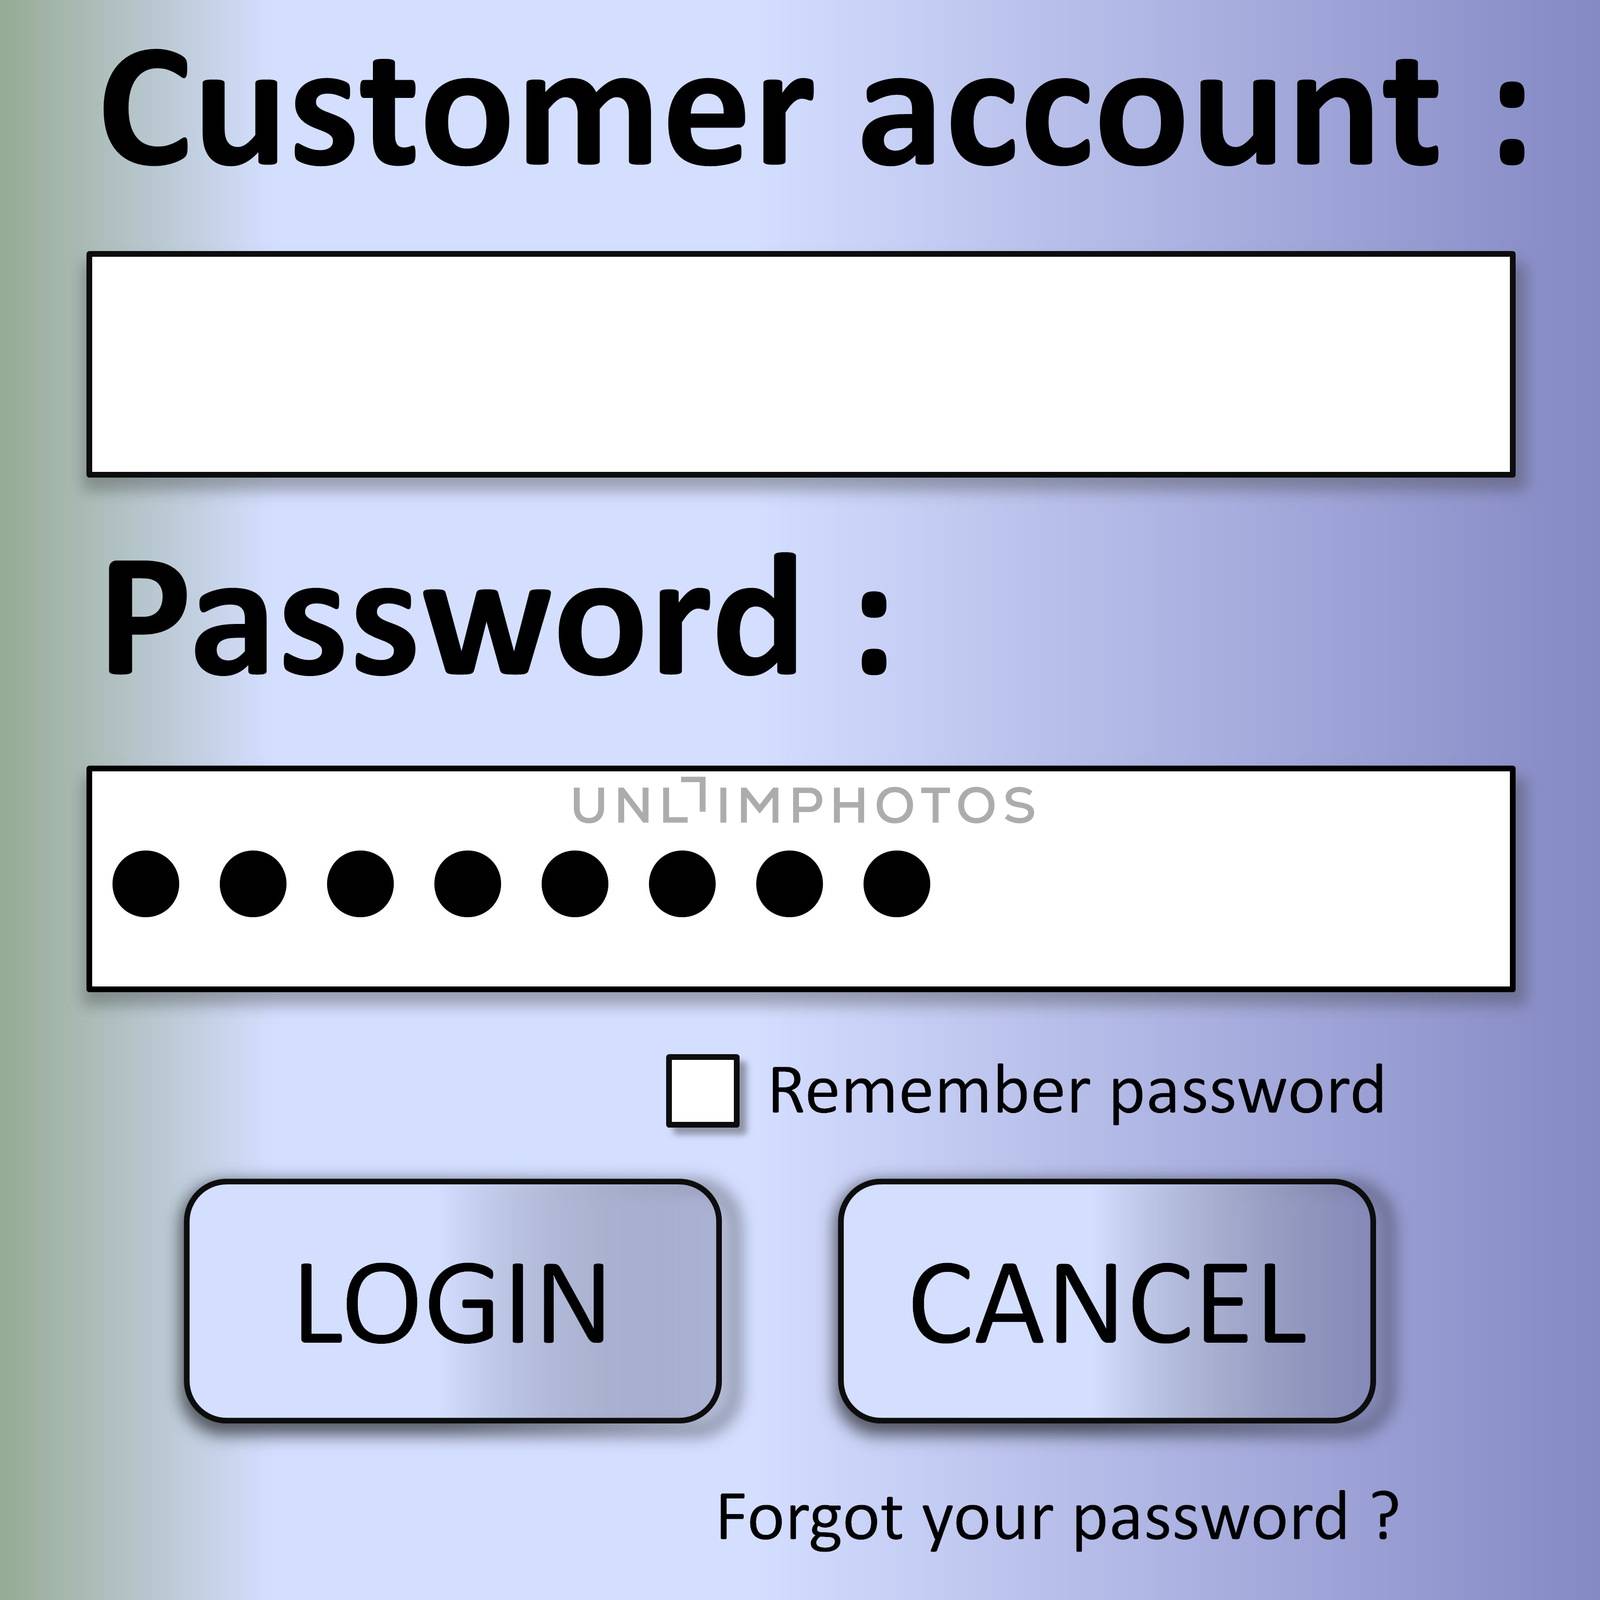 Customer login form with password and buttons